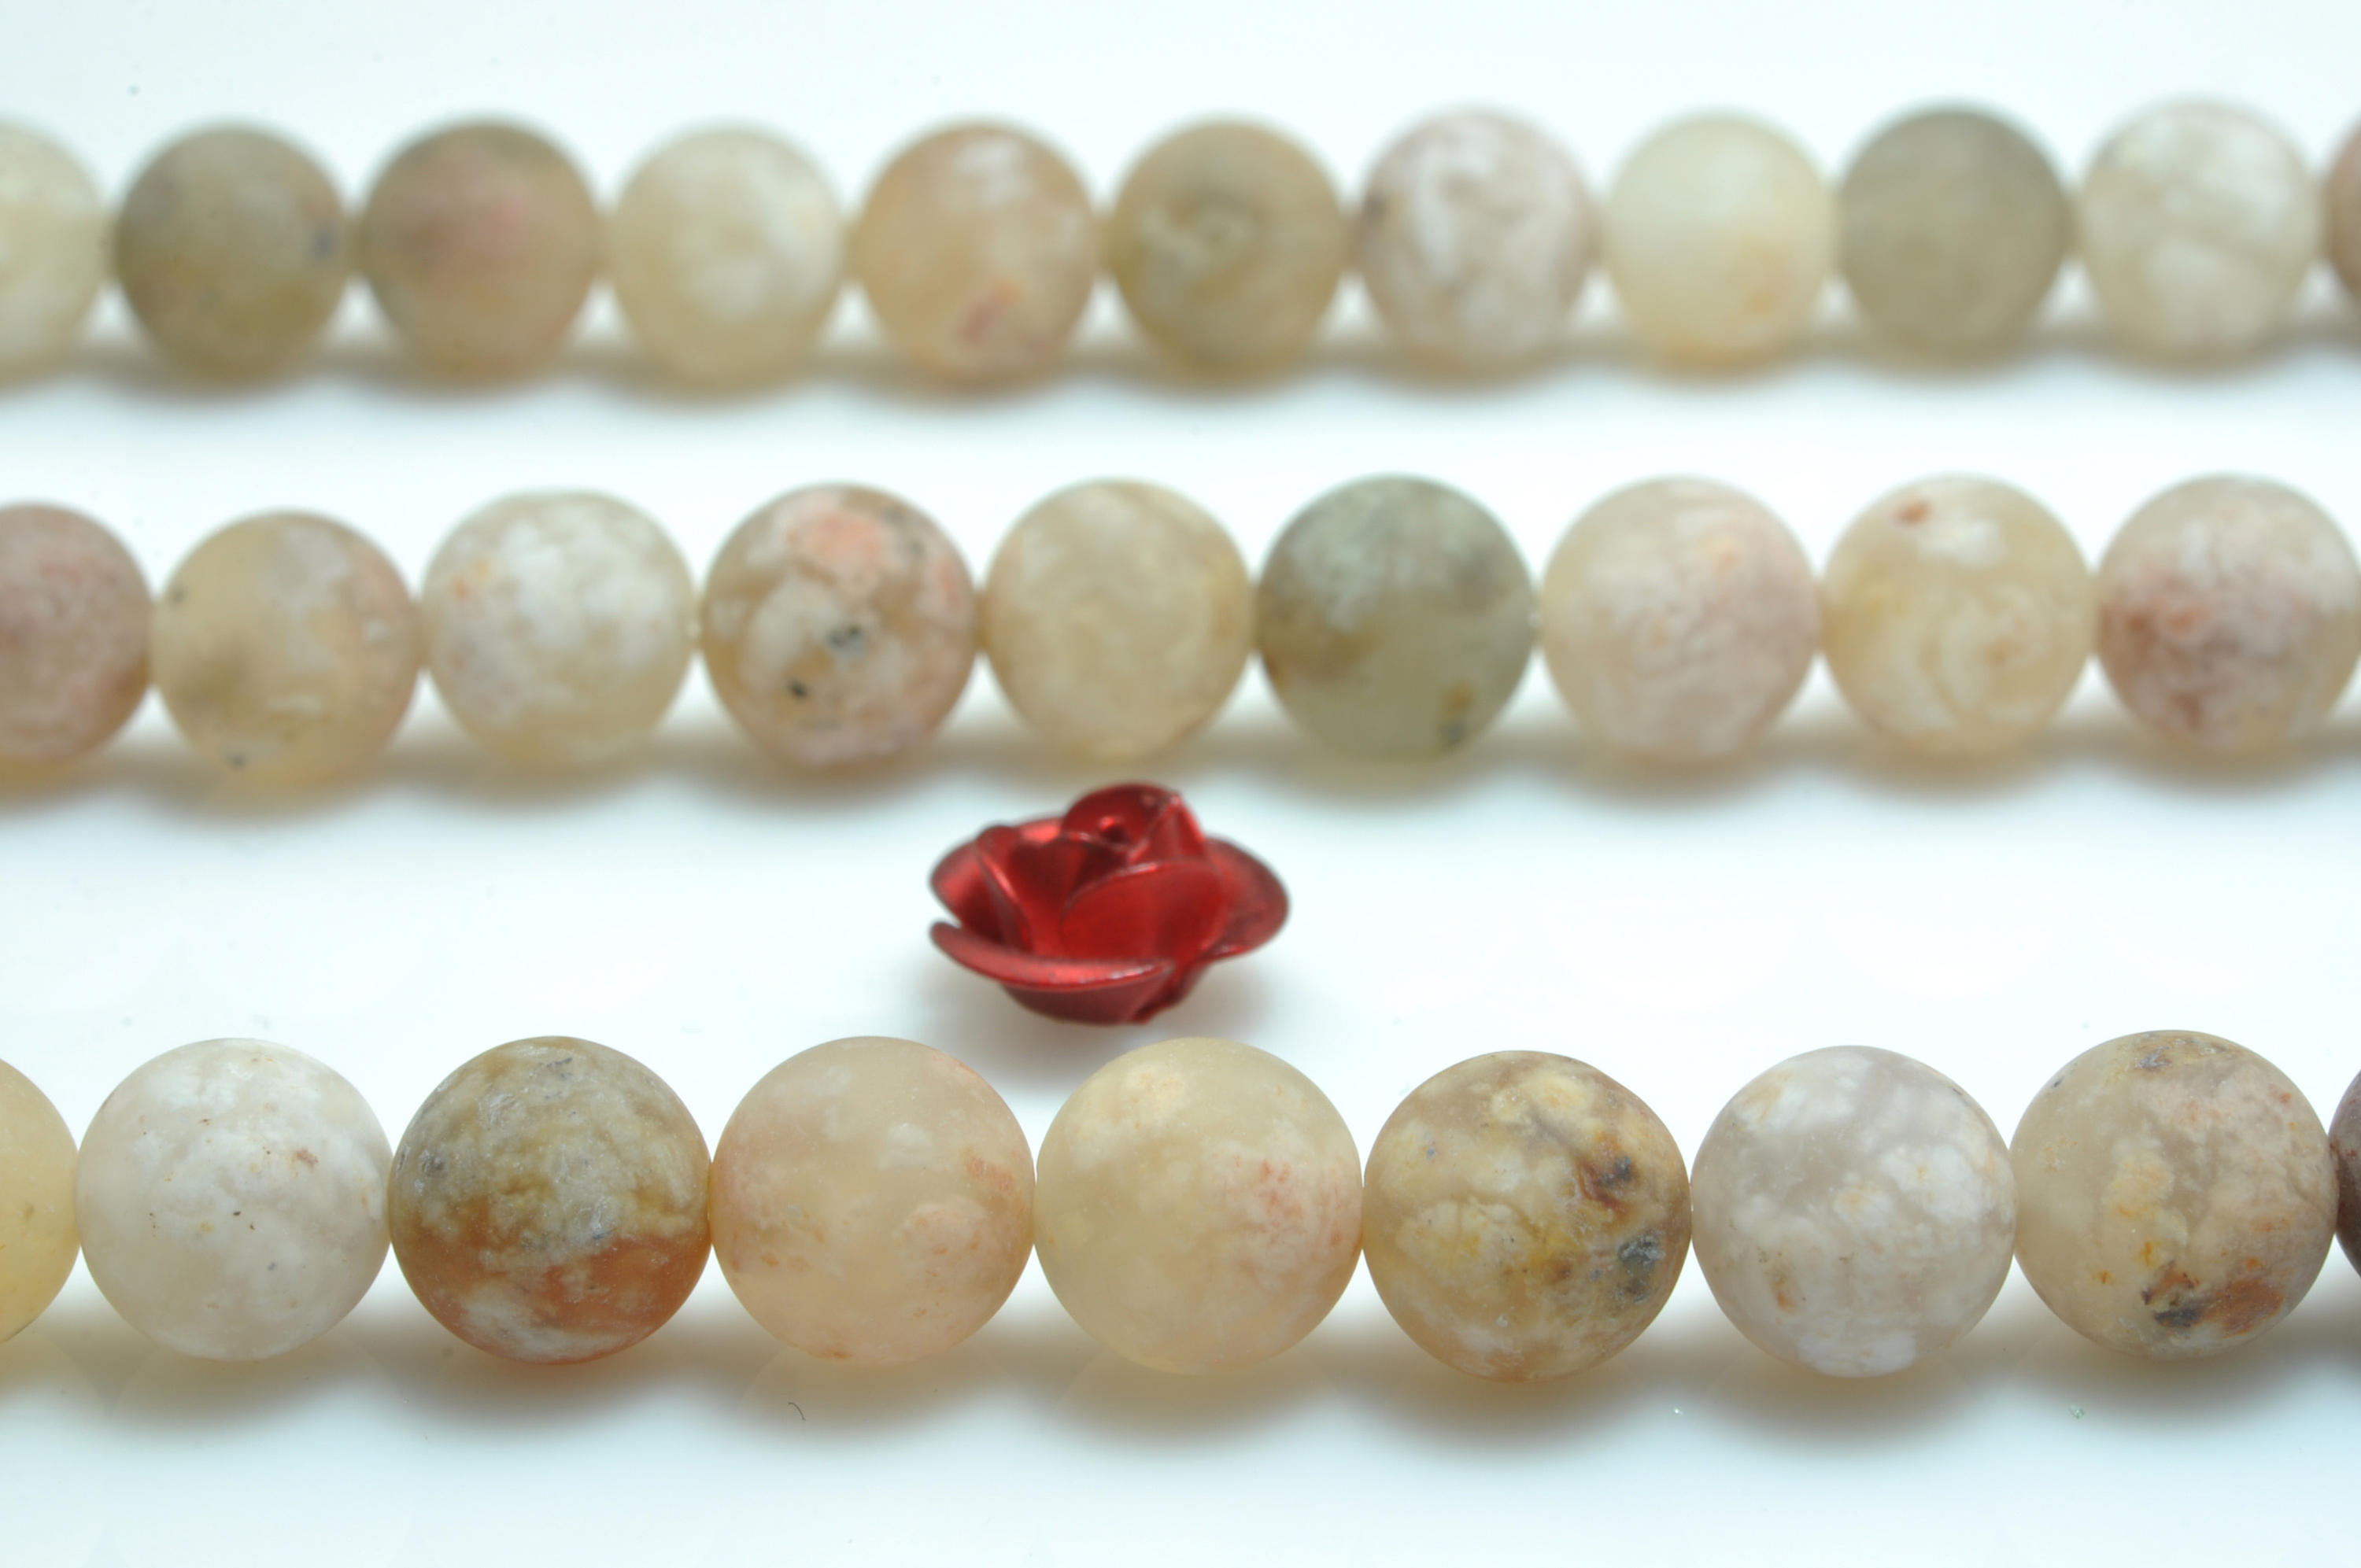 62 pcs of Natural Pink Moss Agate matte round beads in 6mm